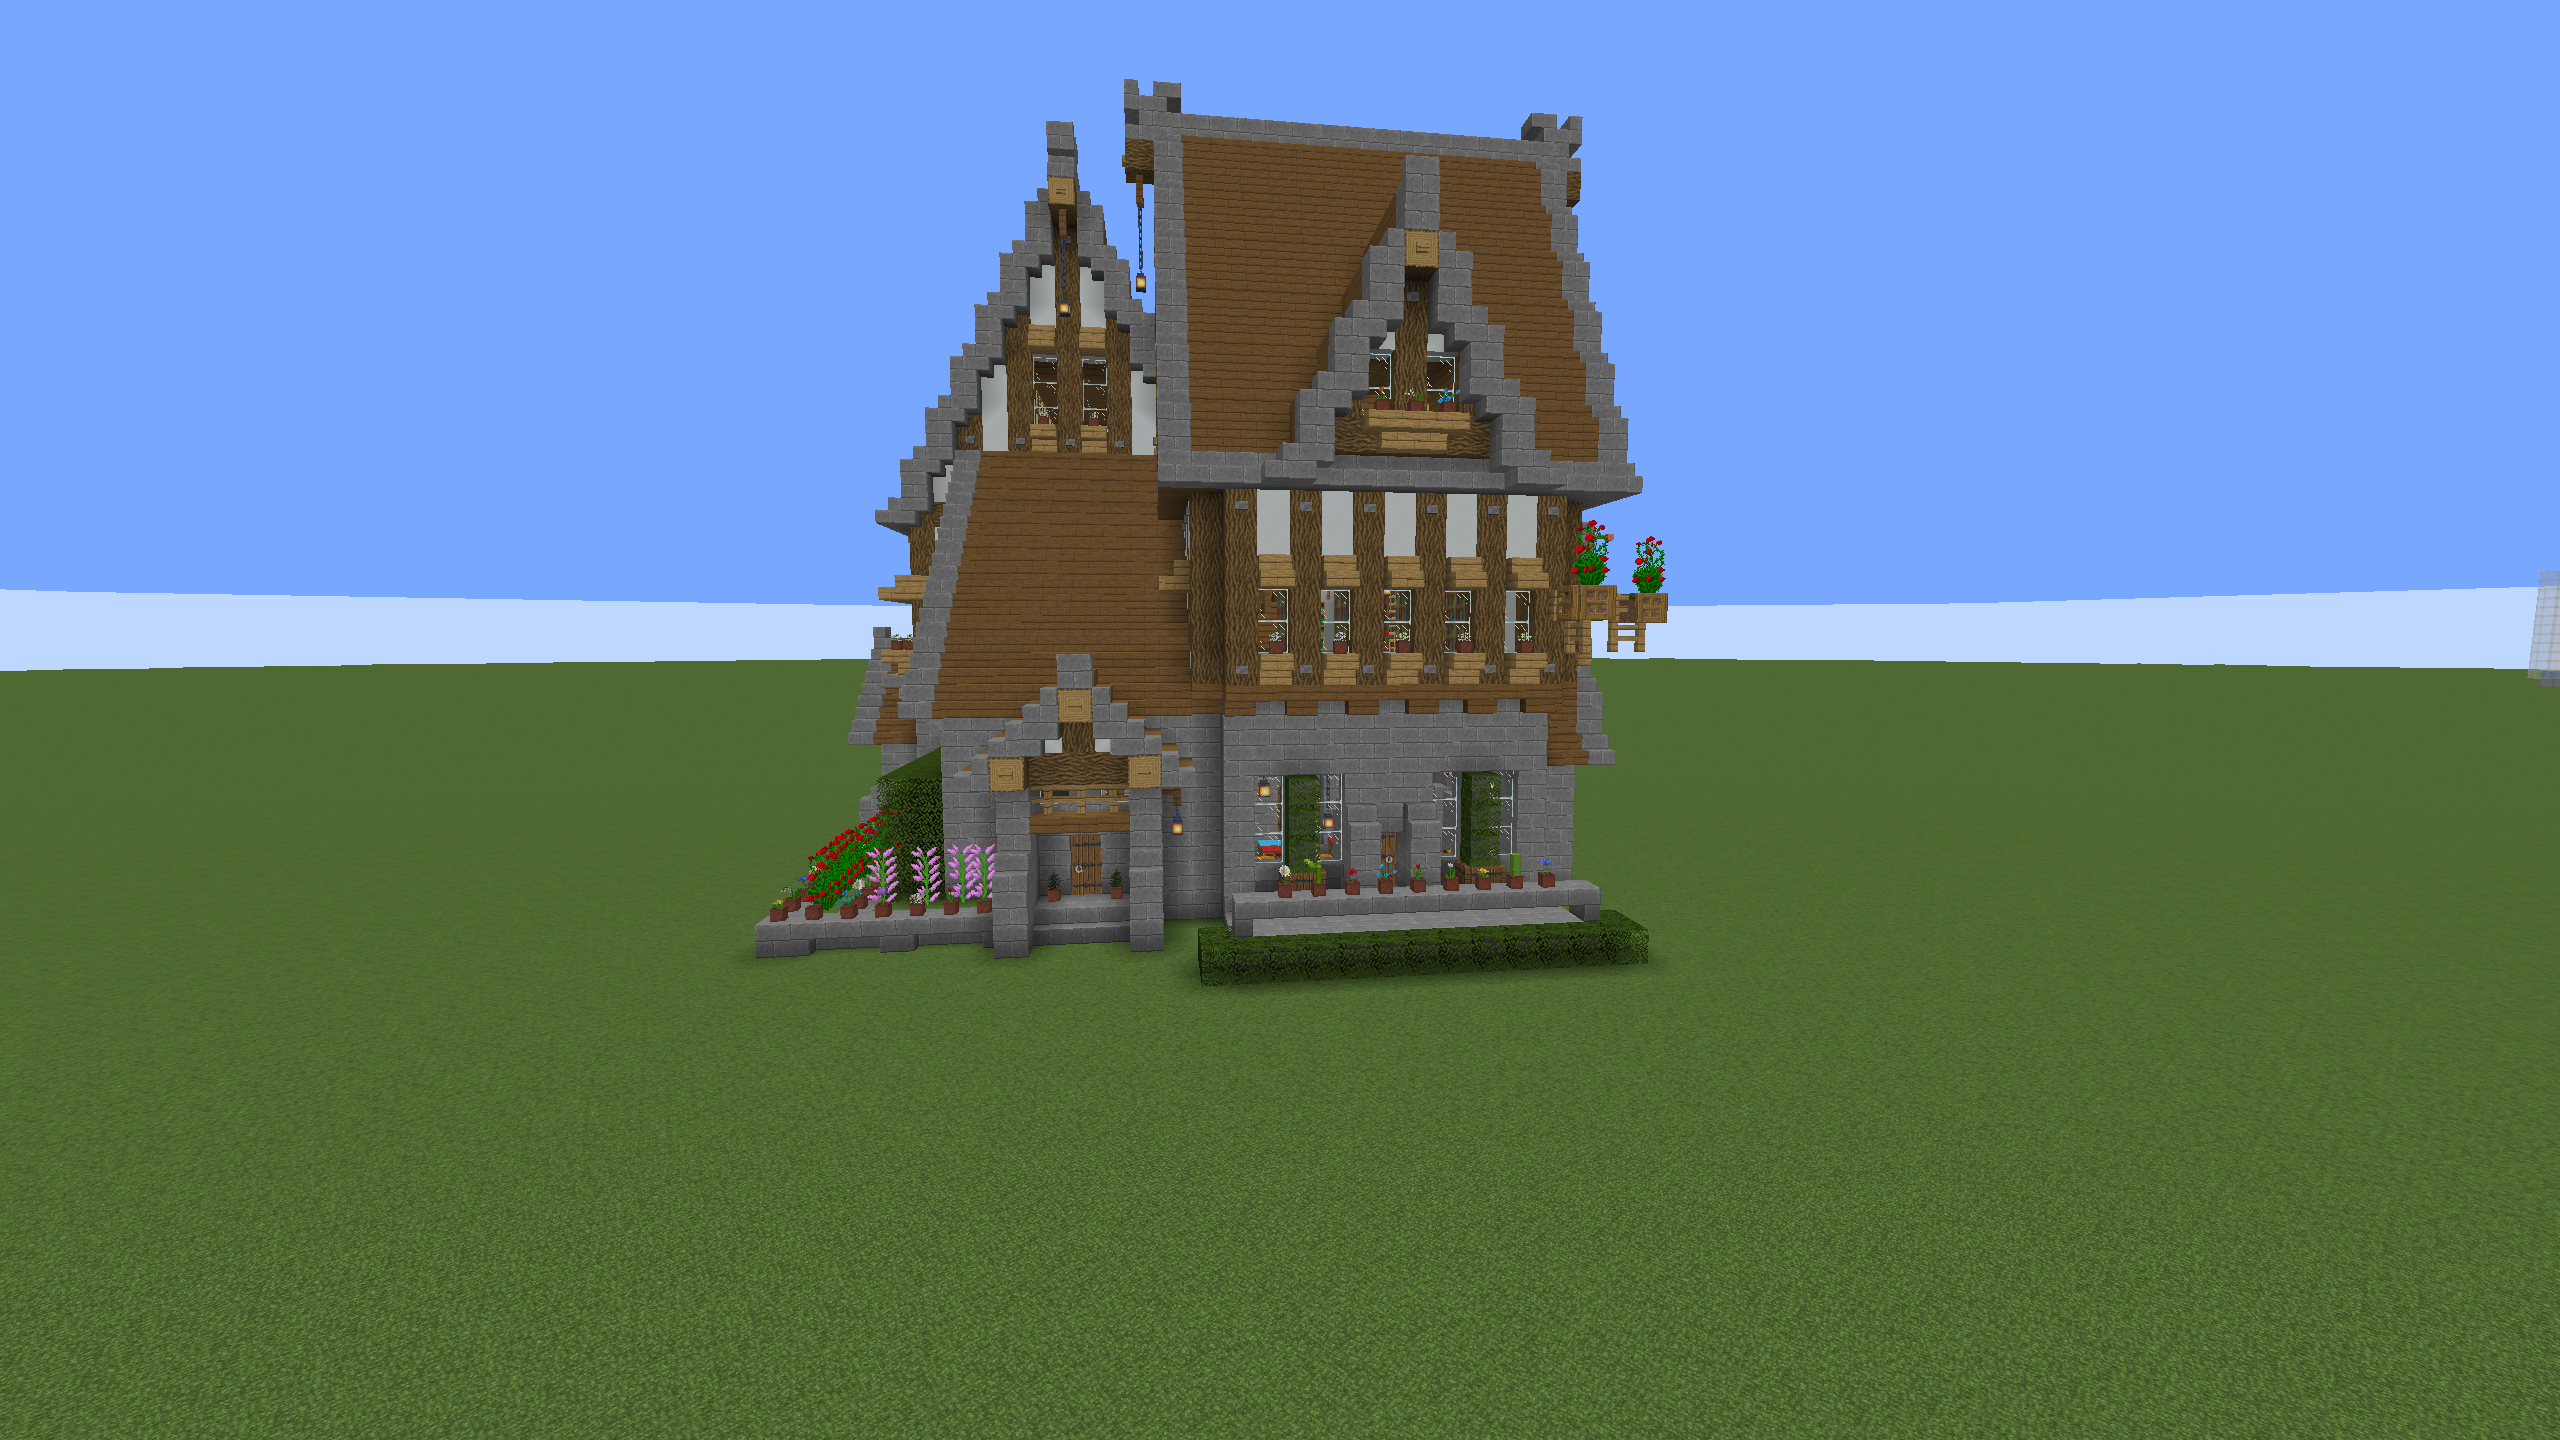 Minecract Survival House with interior schematic (litematic)